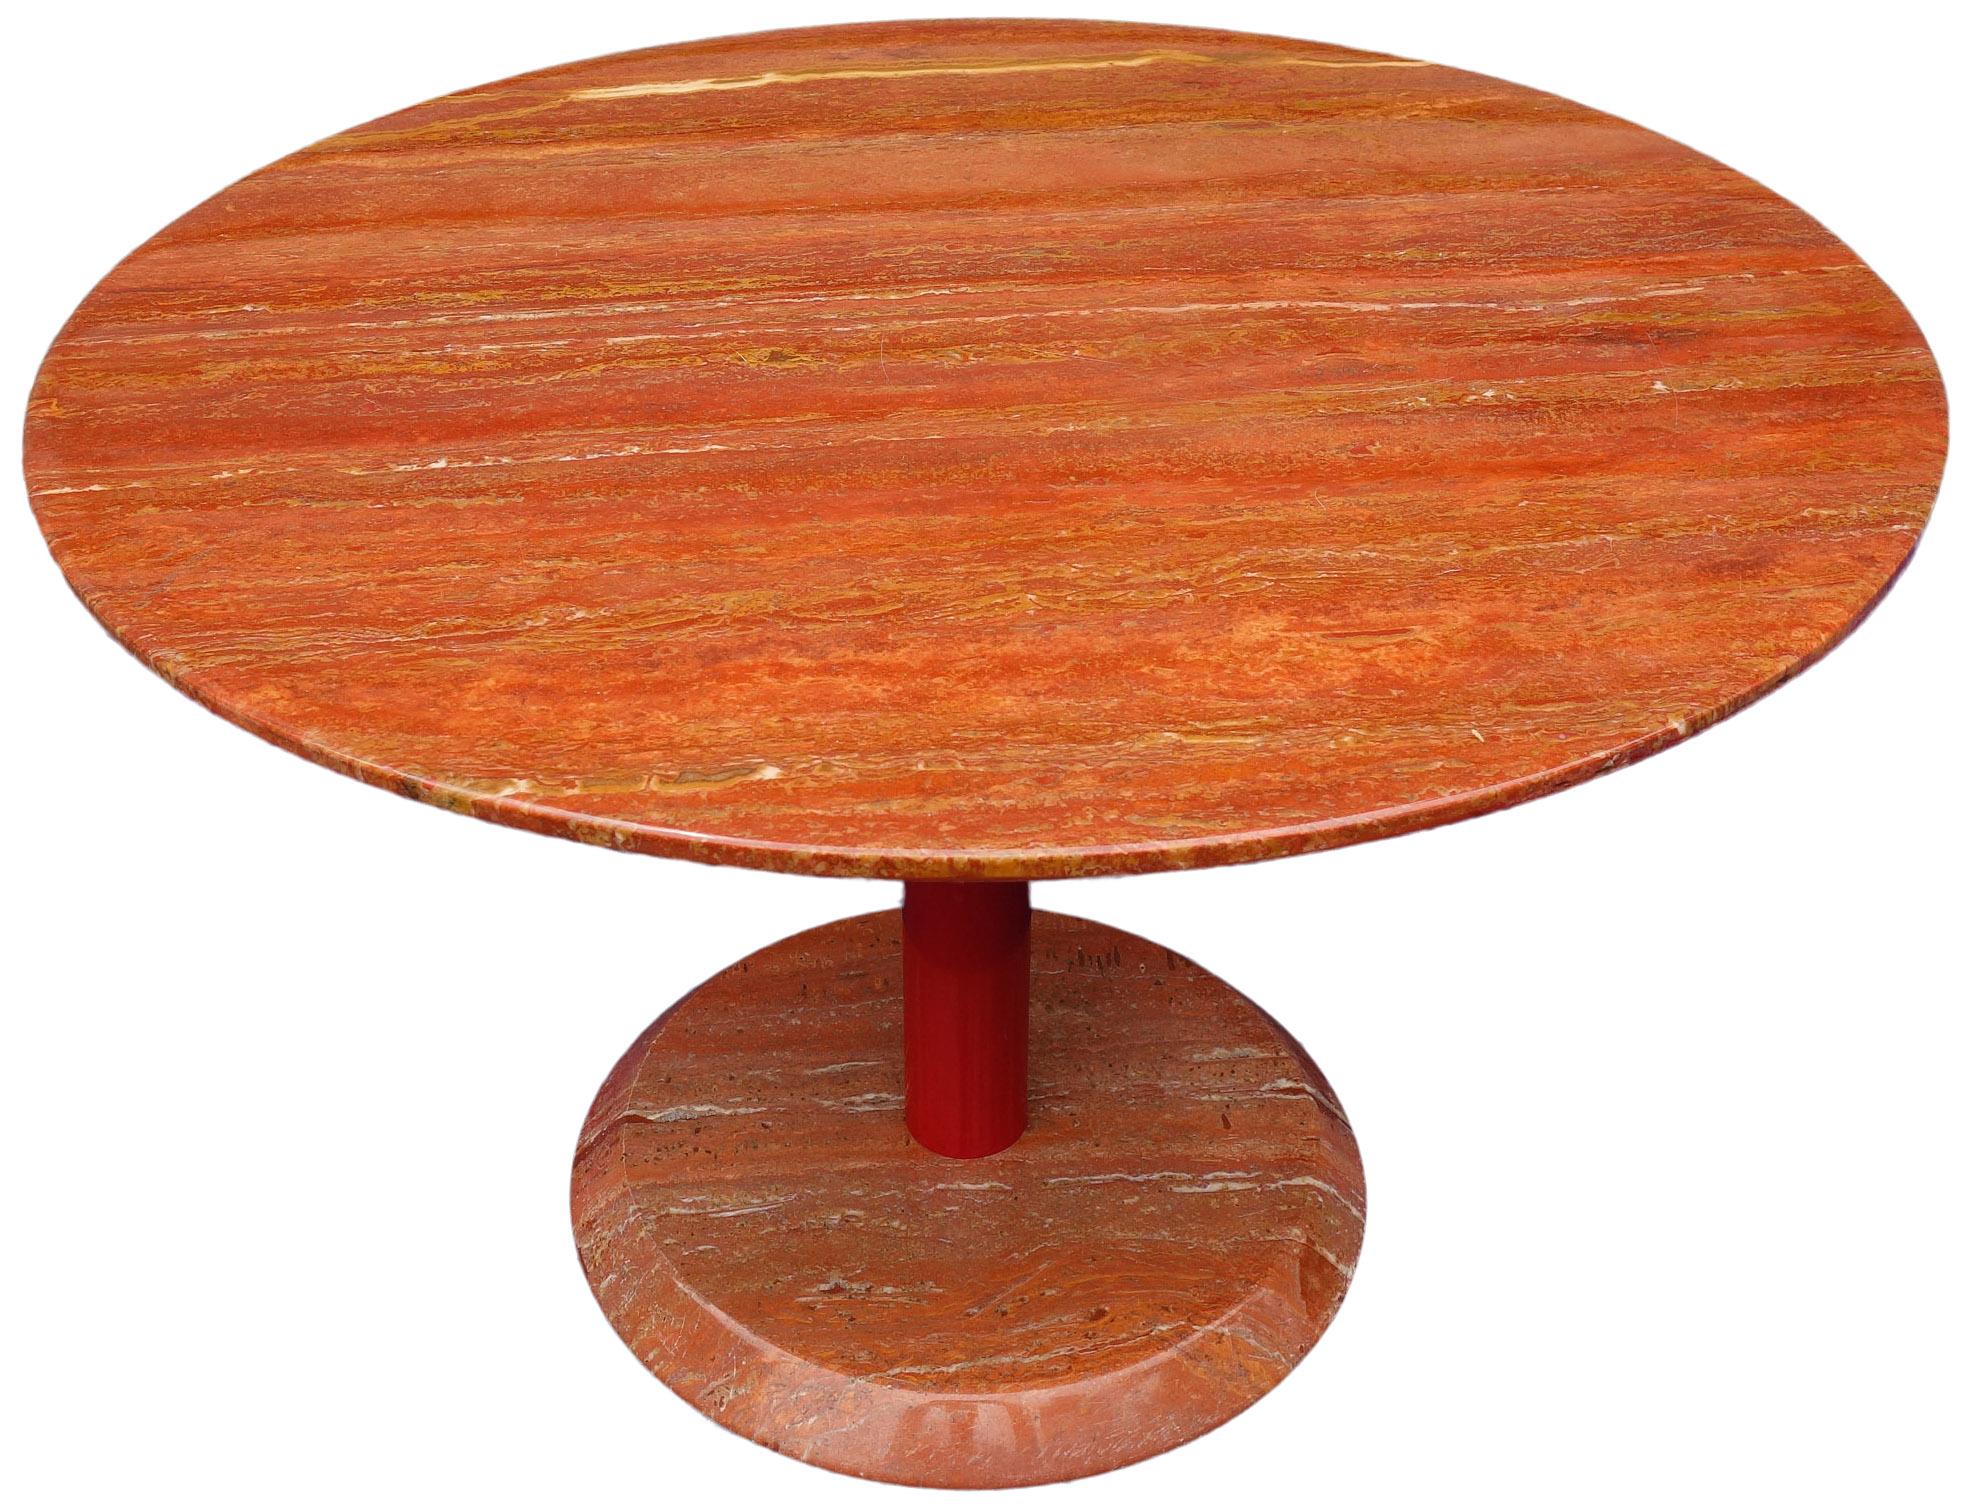 This stunning red marble table and red enabled steel stem was produced in Italy, 1970s. Featuring a marble top and base both beveled in reverse with the top having a knife edge. This midcentury table works well with Memphis Milano, space-age, pop,